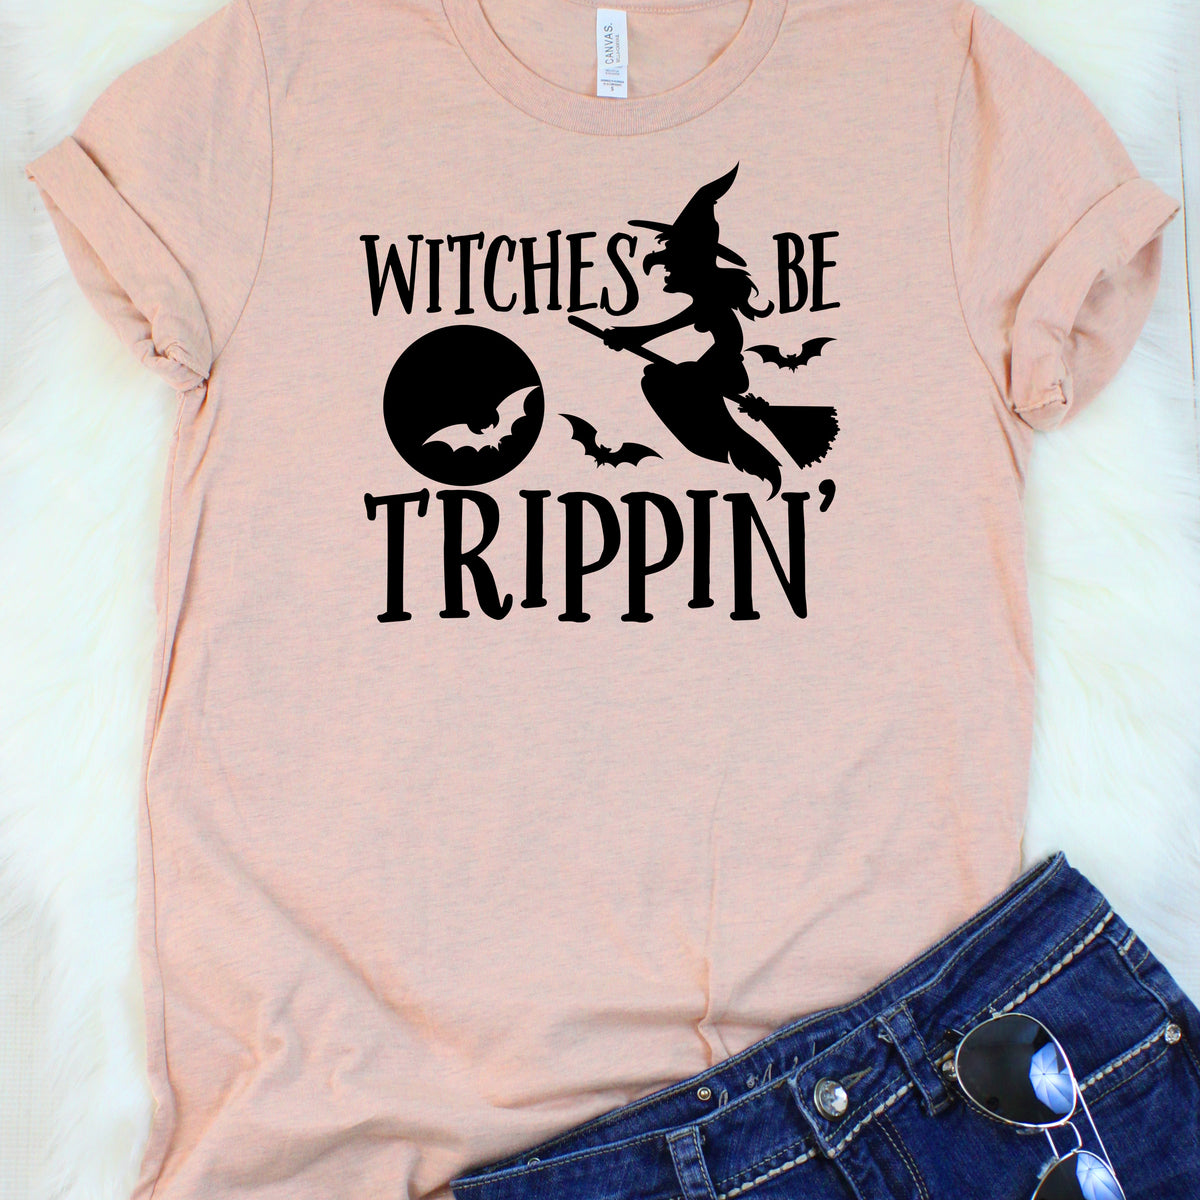 Witches Be Trippin' T-Shirt